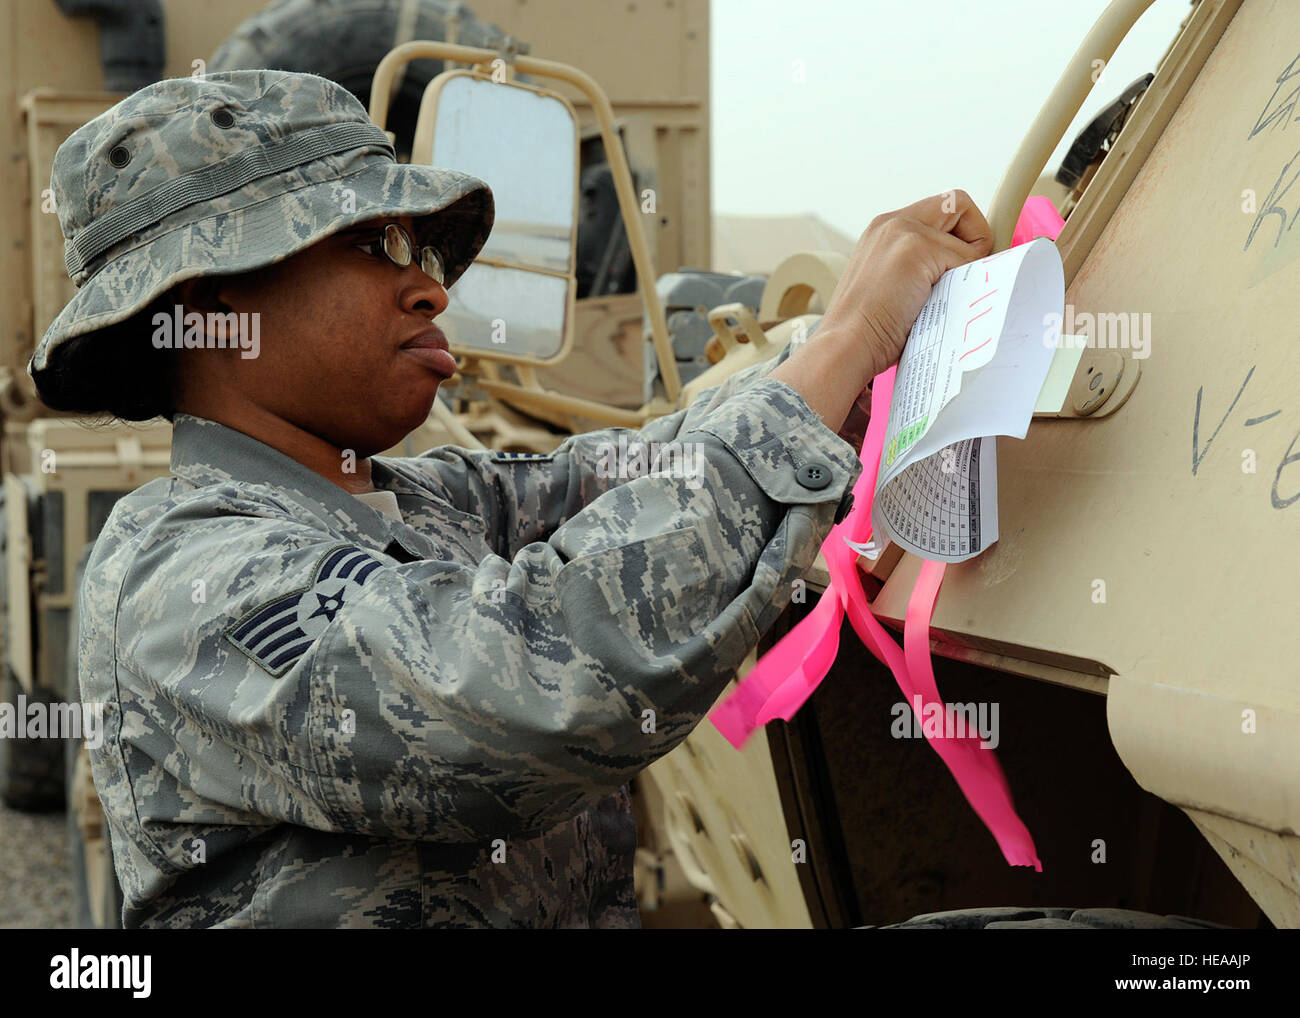 Staff Sgt. Chayla Gooch, 732nd Expeditionary Logistical Readiness Squadron, 586th Task Force, marks the armored security vehicle ensuring the right vehicles get picked up for transport at Camp Liberty, Iraq on Feb. 27, 2009. This vehicle is a part of a convoy going to Kuwait with approximately 30 semi trucks loaded with all types of military vehicles. Sergeant Gooch is a Joint Expeditionary Taking airman who is an Air Force member tasked for army jobs.  The personnel at the yard have processed more than a billion dollars of inventory for the Army through their six month deployment. Sergeant Go Stock Photo